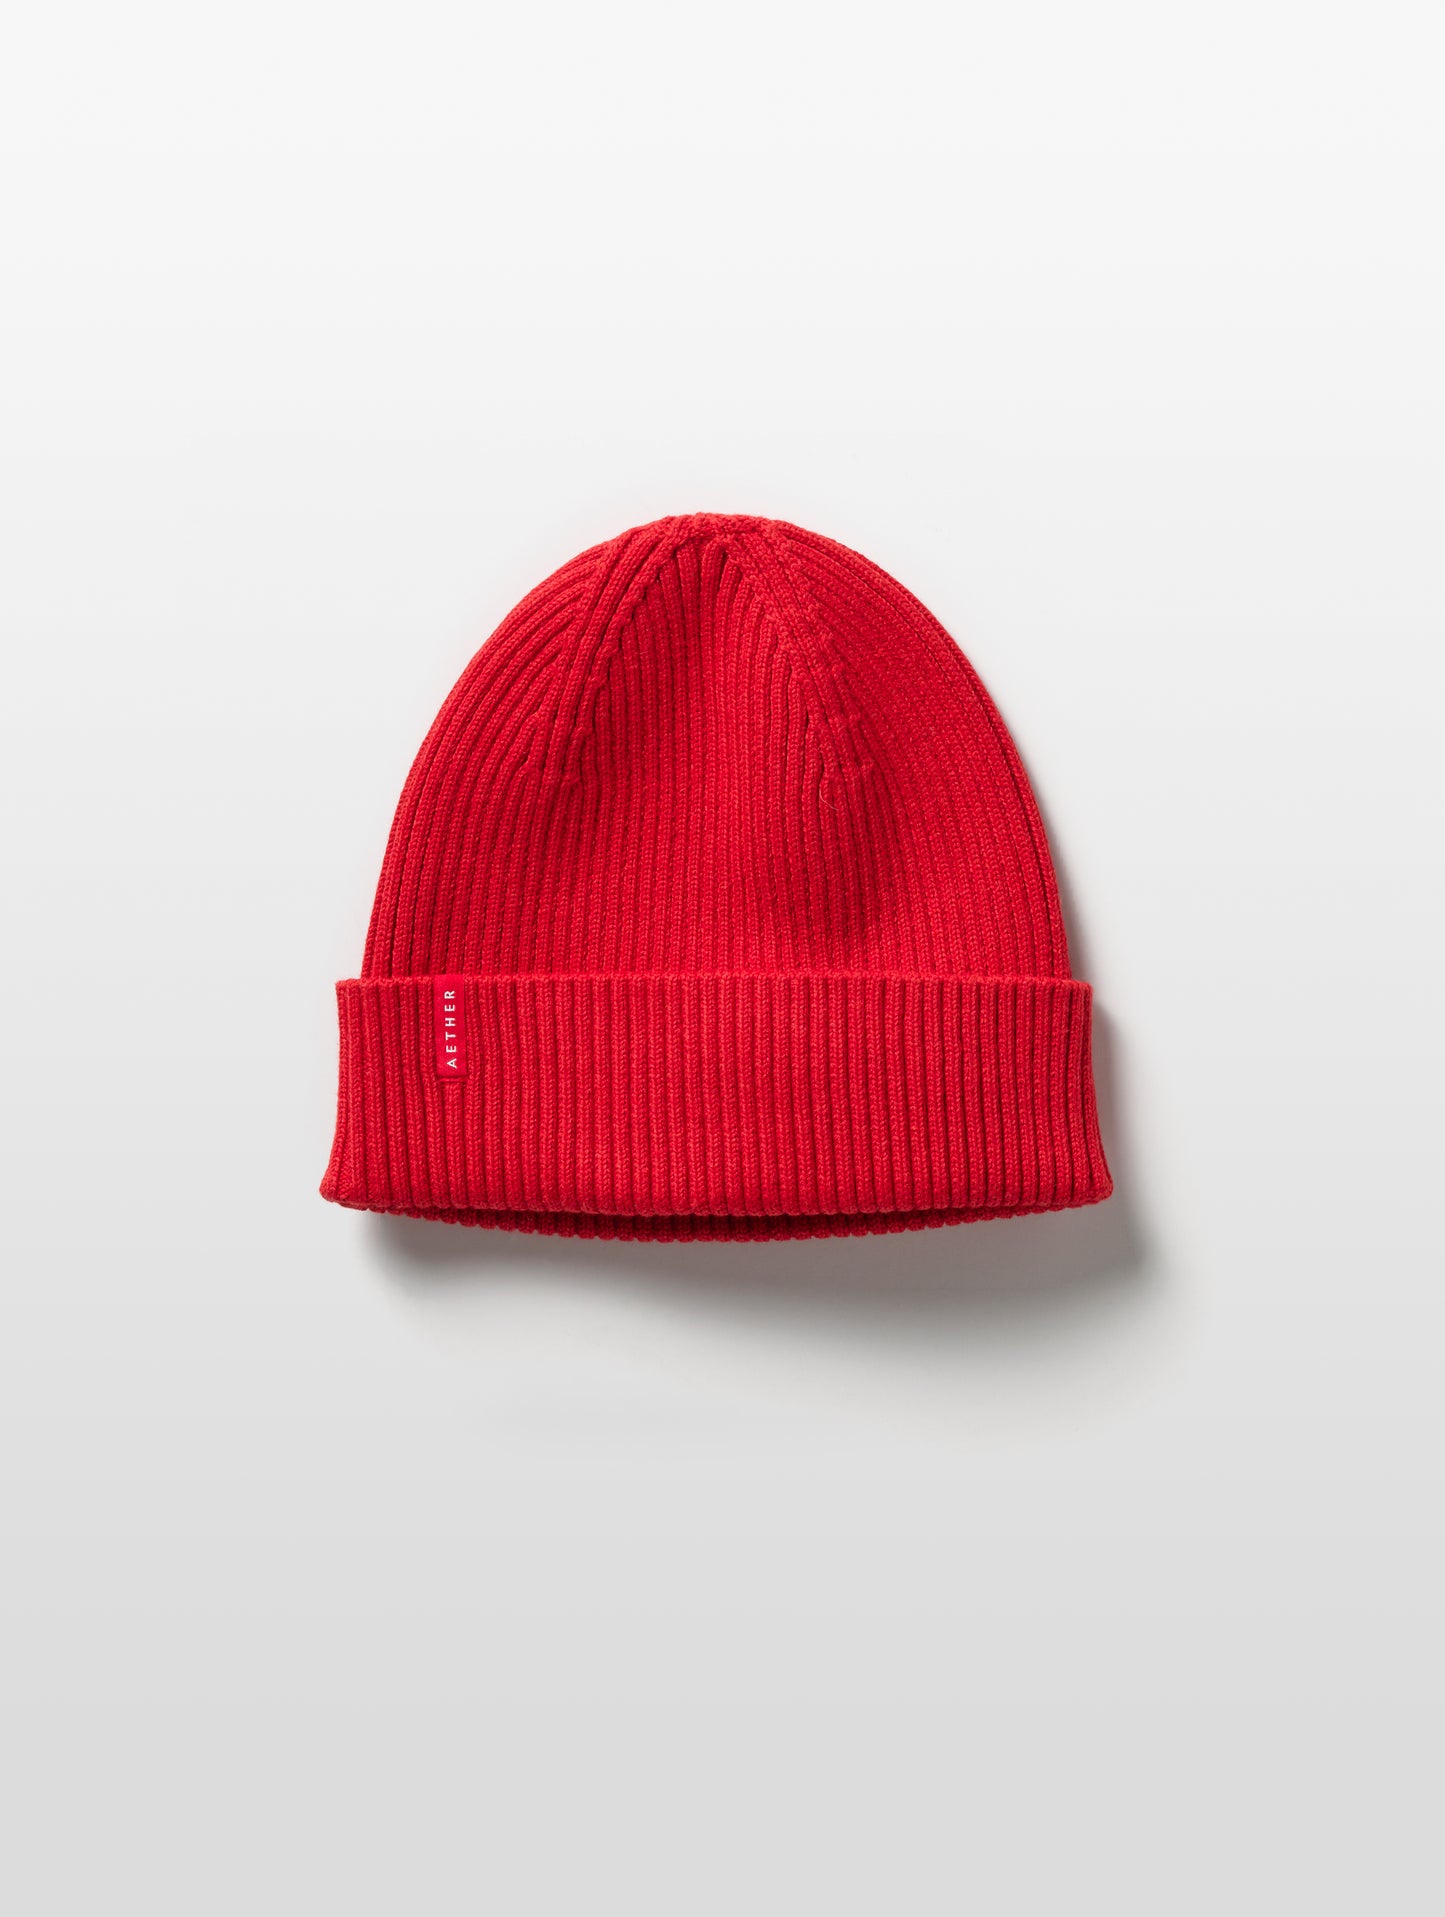 red cotton beanie from AETHER Apparel